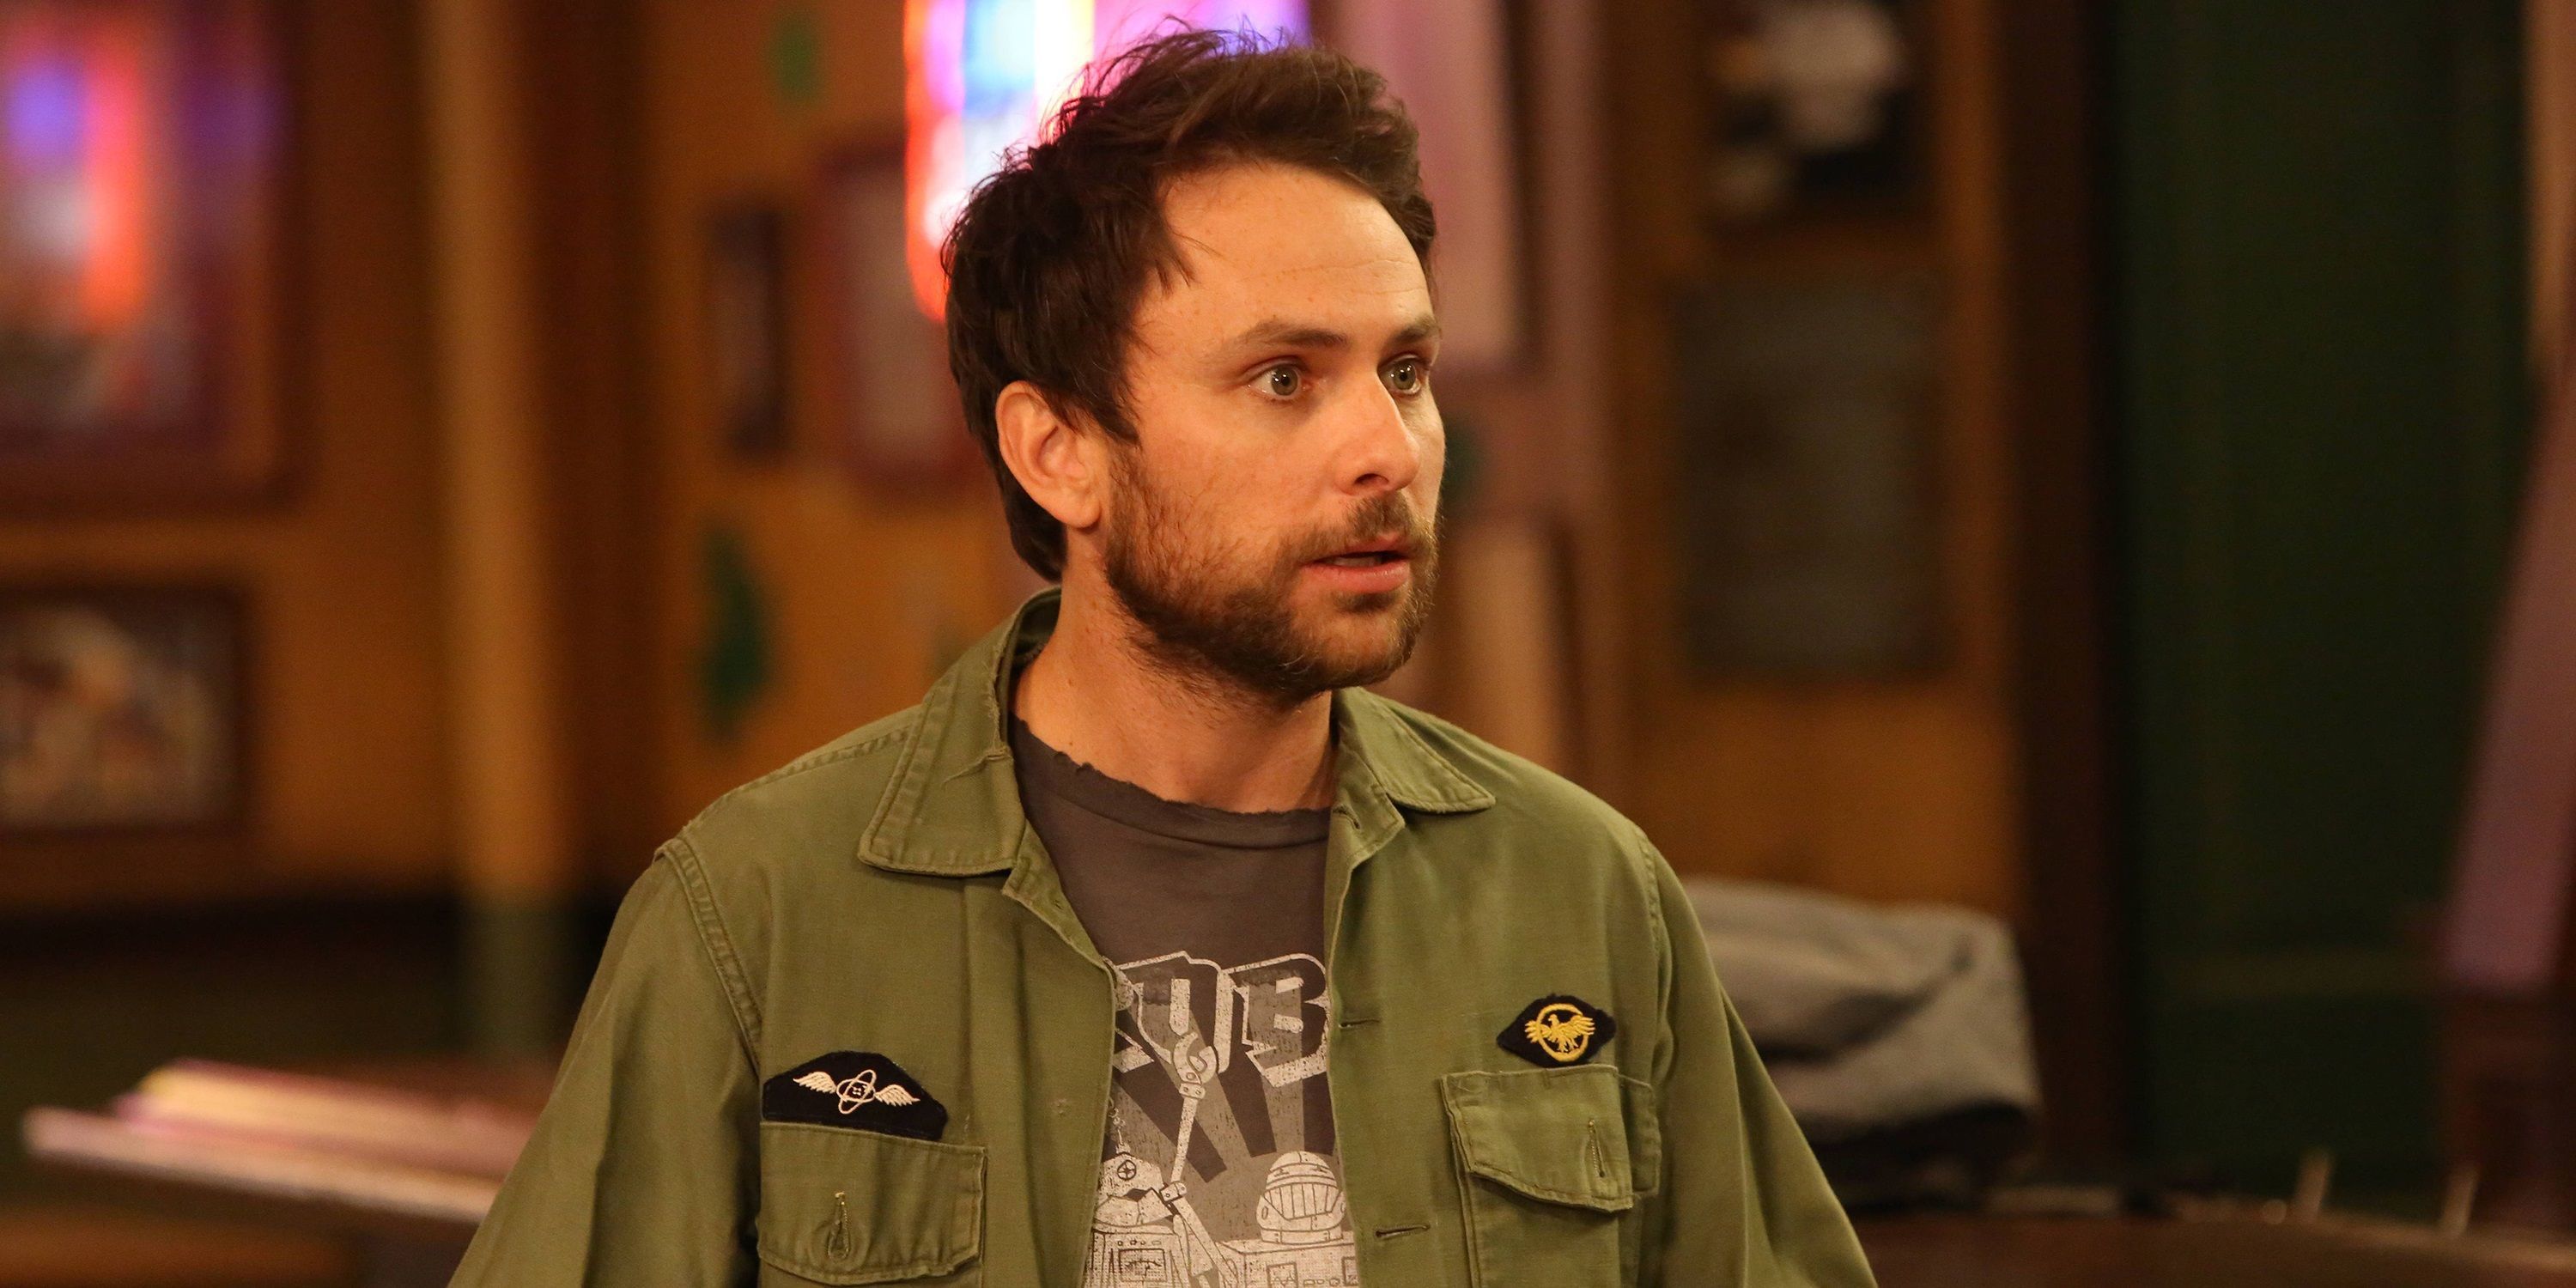 Charlie wearing his green polo in It's Always Sunny in Philadelphia.